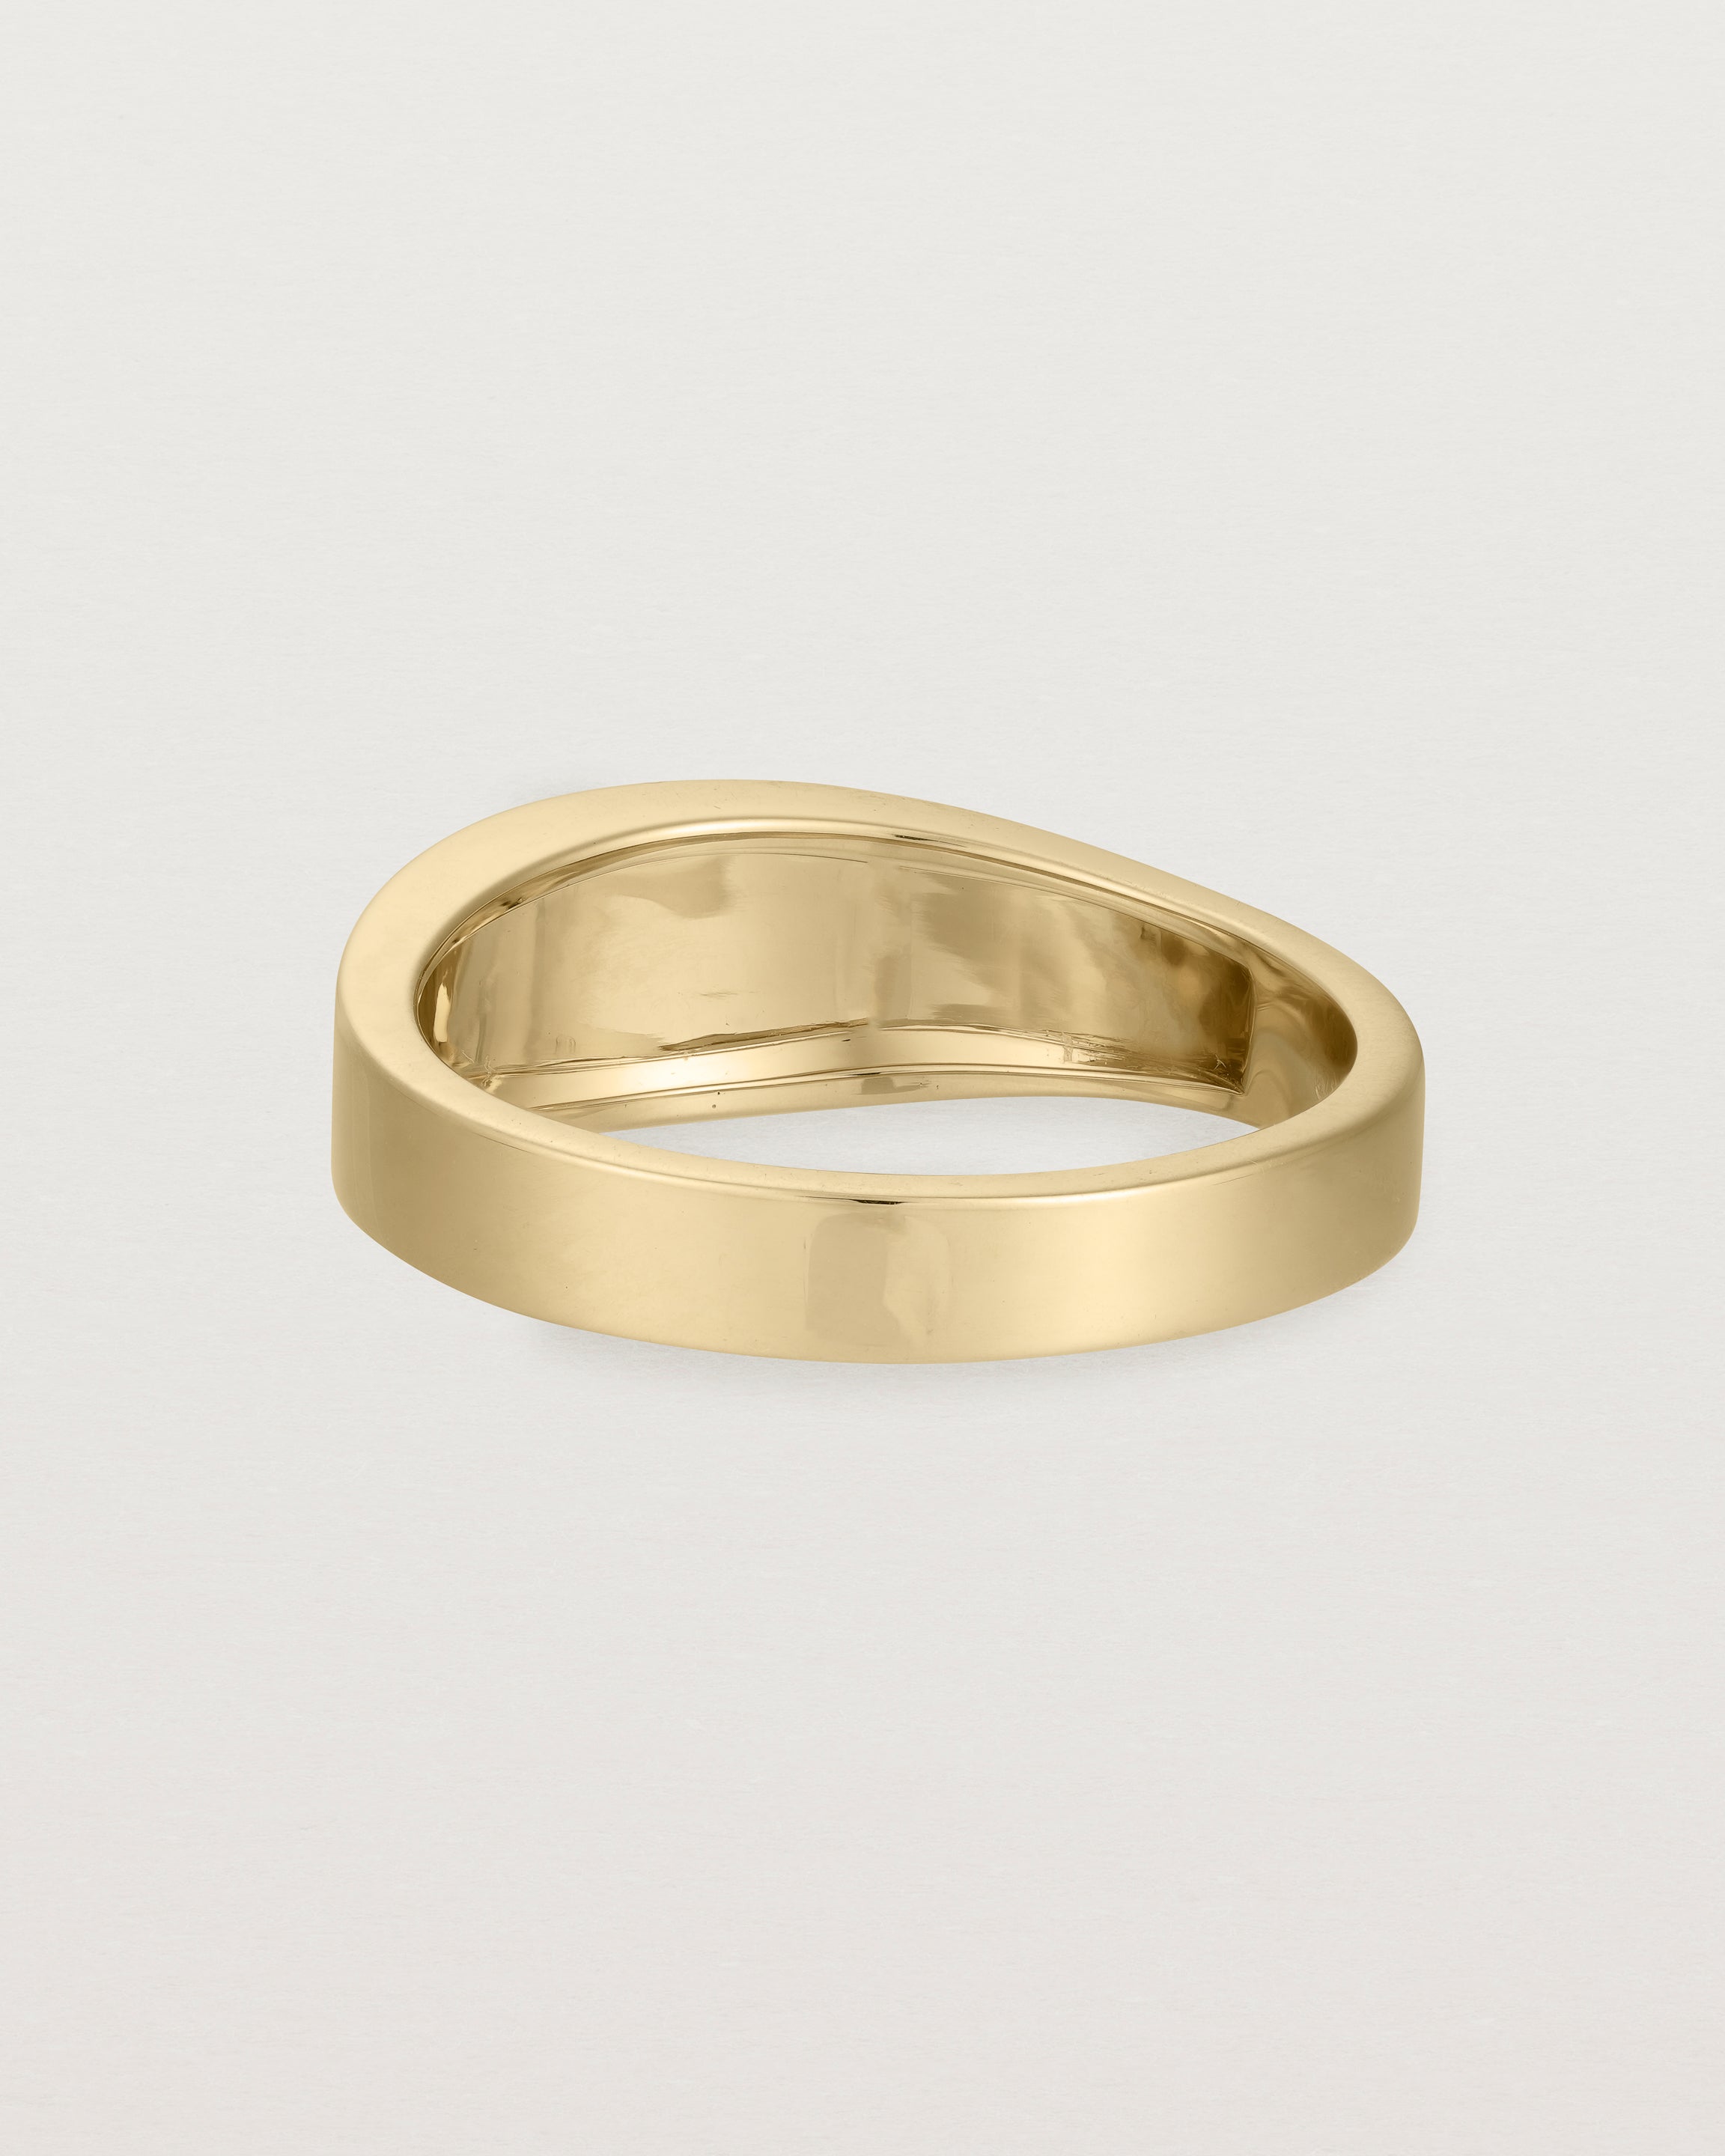 Back view of the Amos Ring in Yellow Gold.